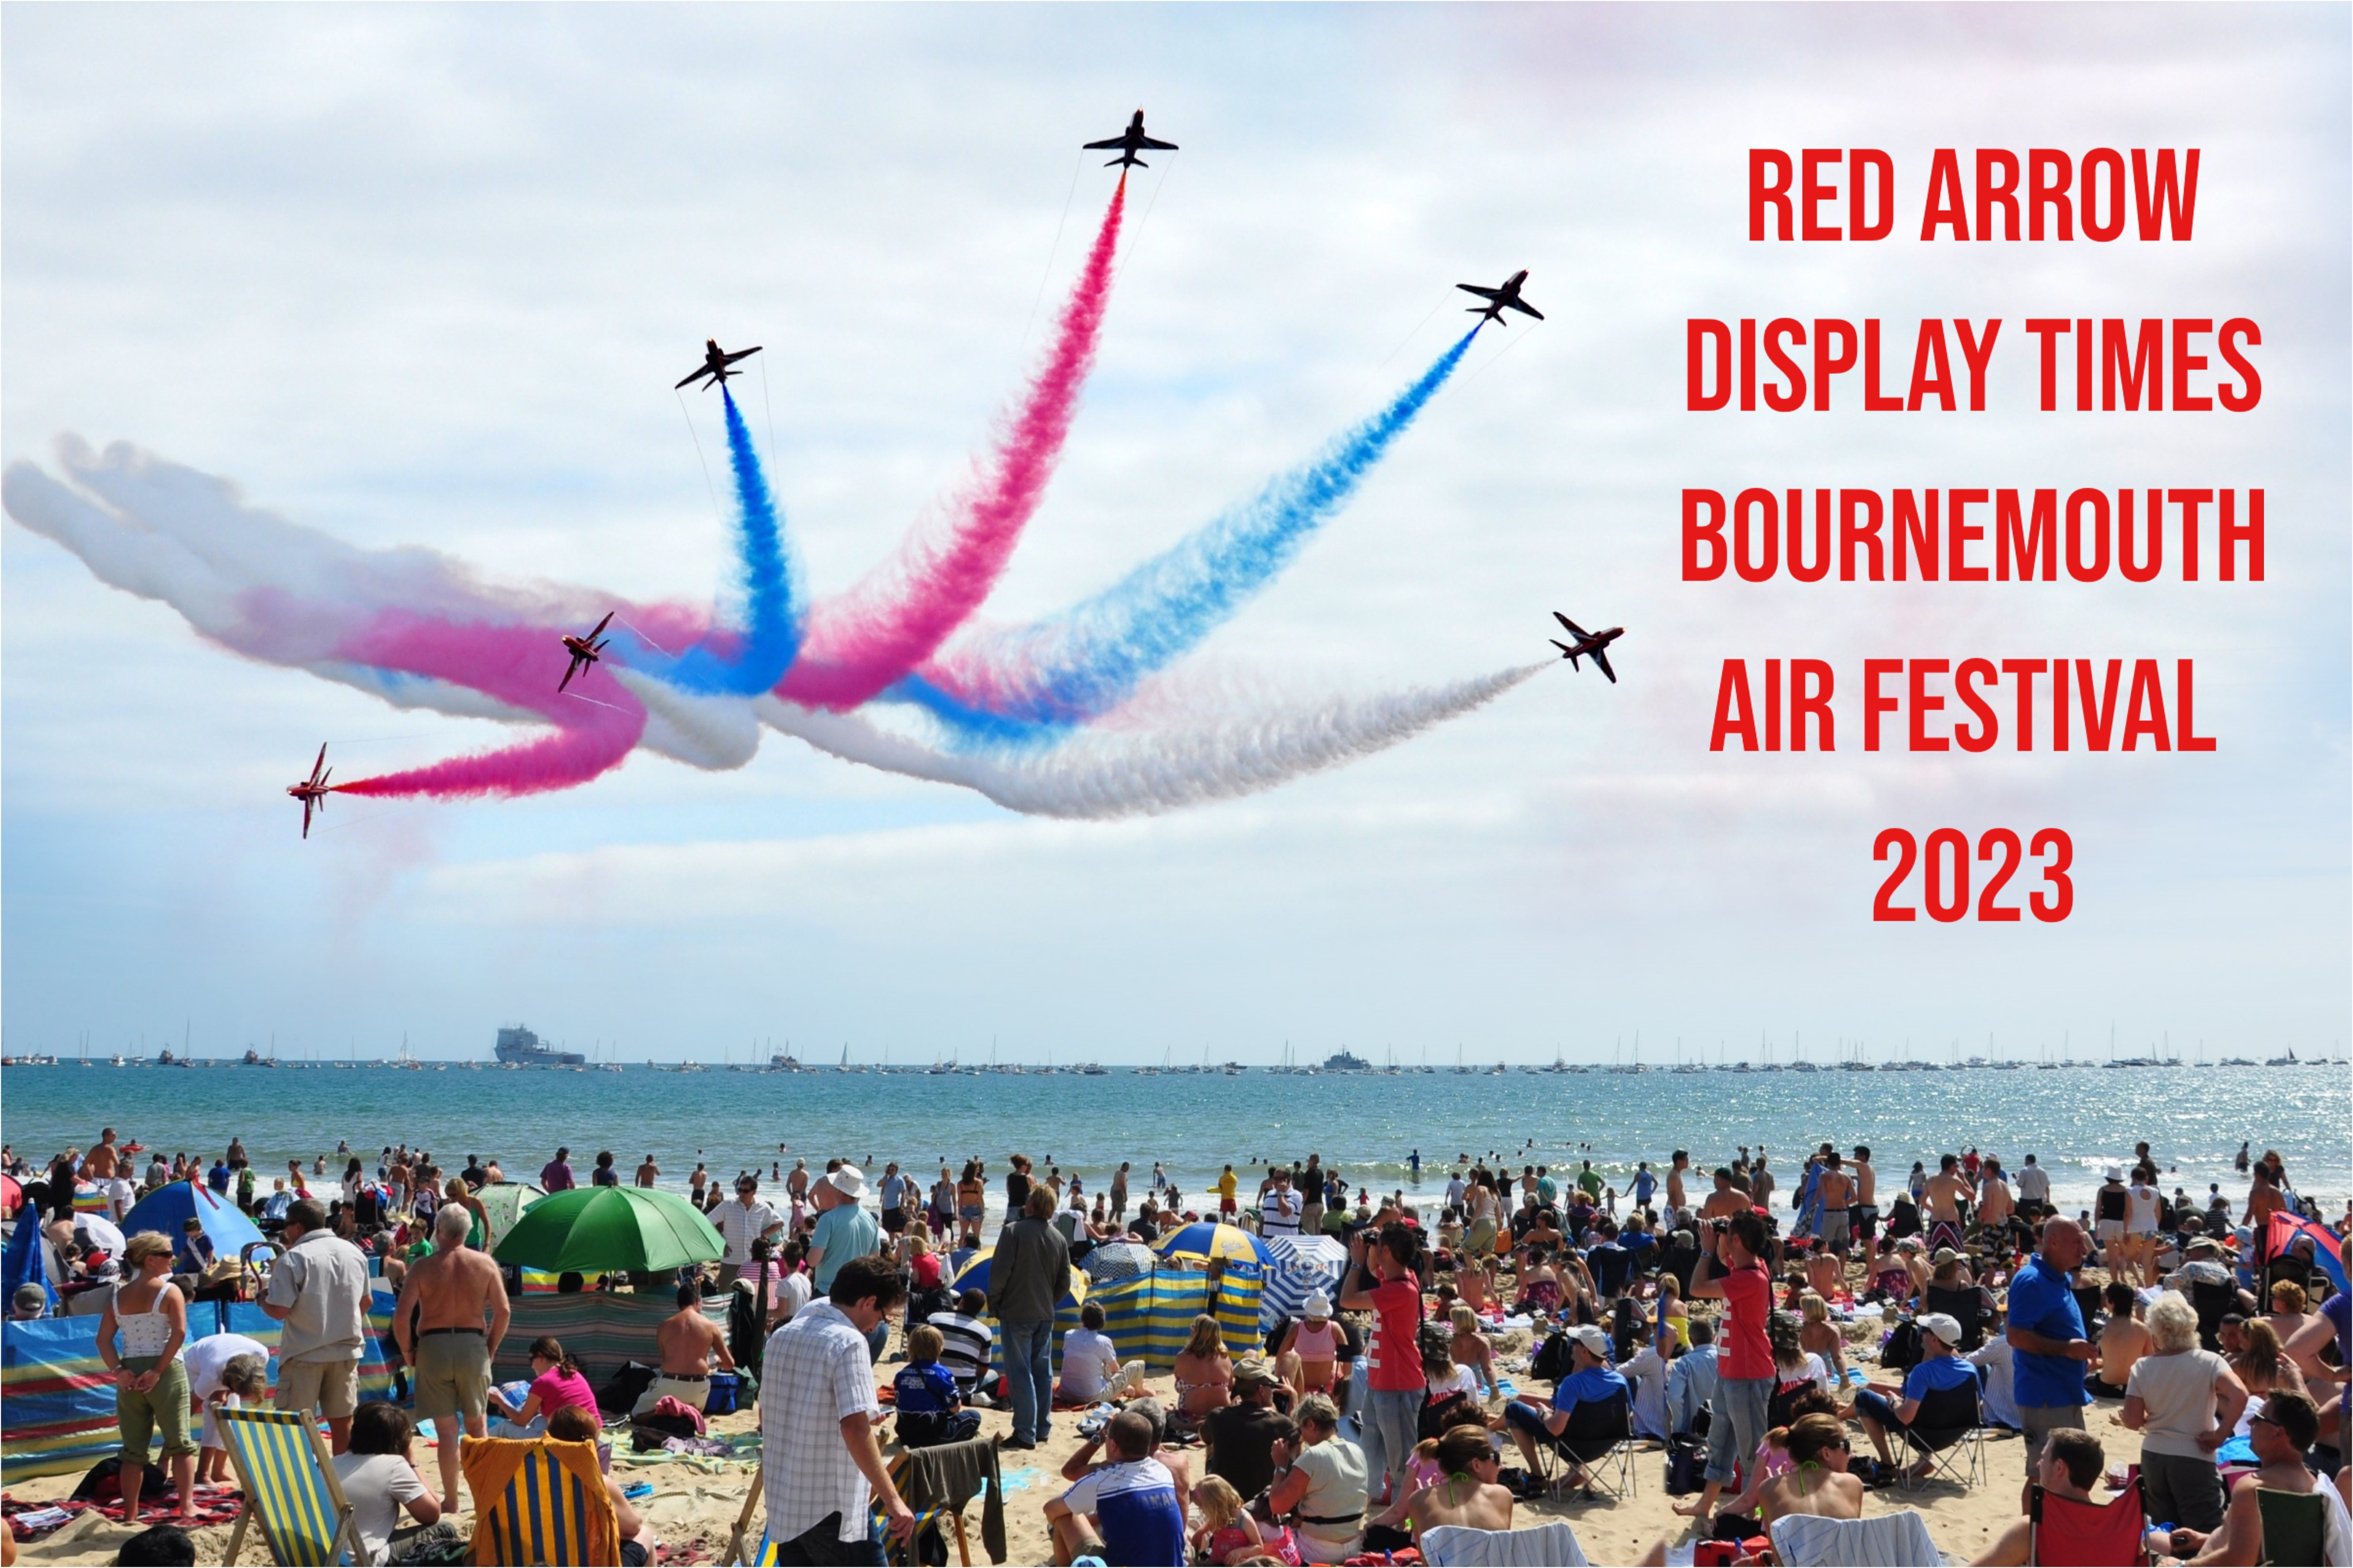 Bournemouth Air Festival 2023 - Red Arrows Display Times